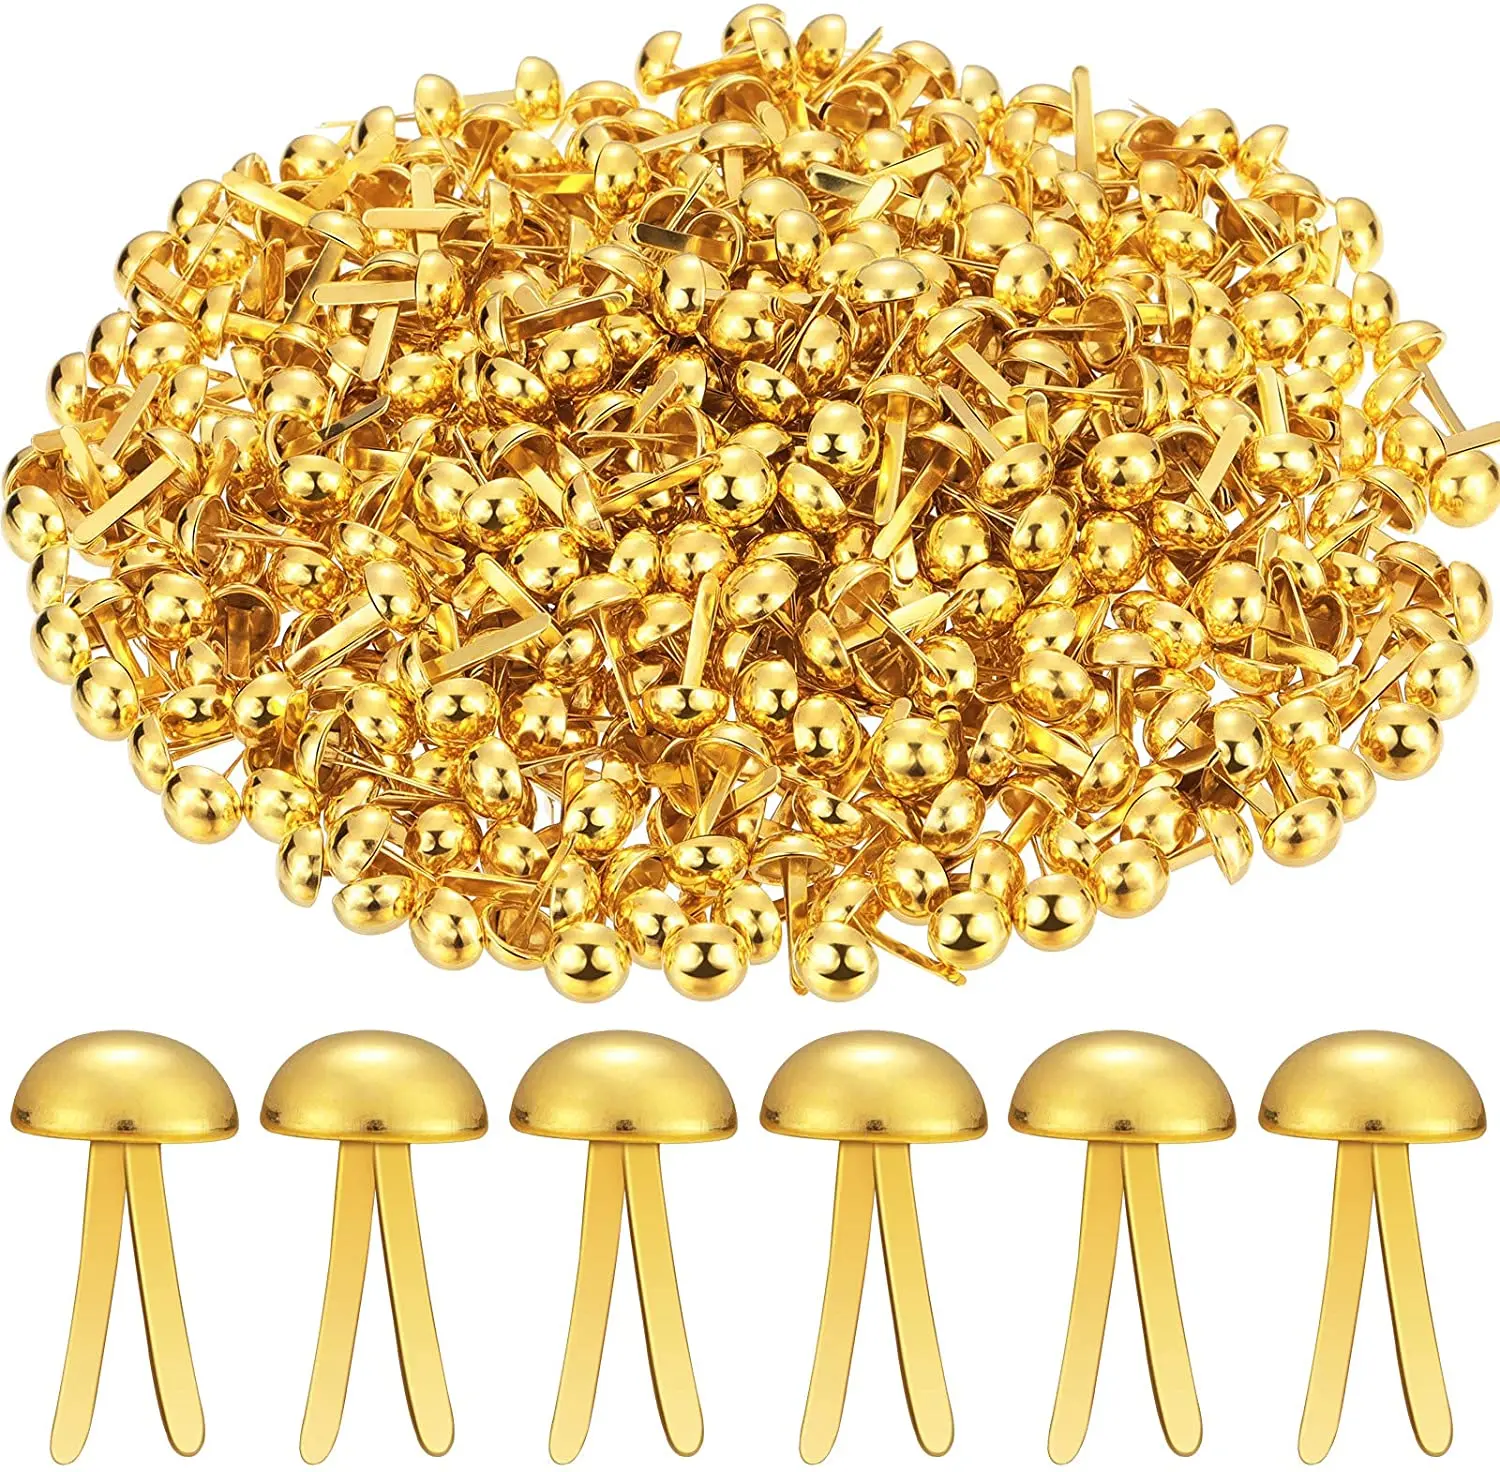 OfficeMax Solid Brass Plated Round Head Fasteners Gold 100bx - Office Depot